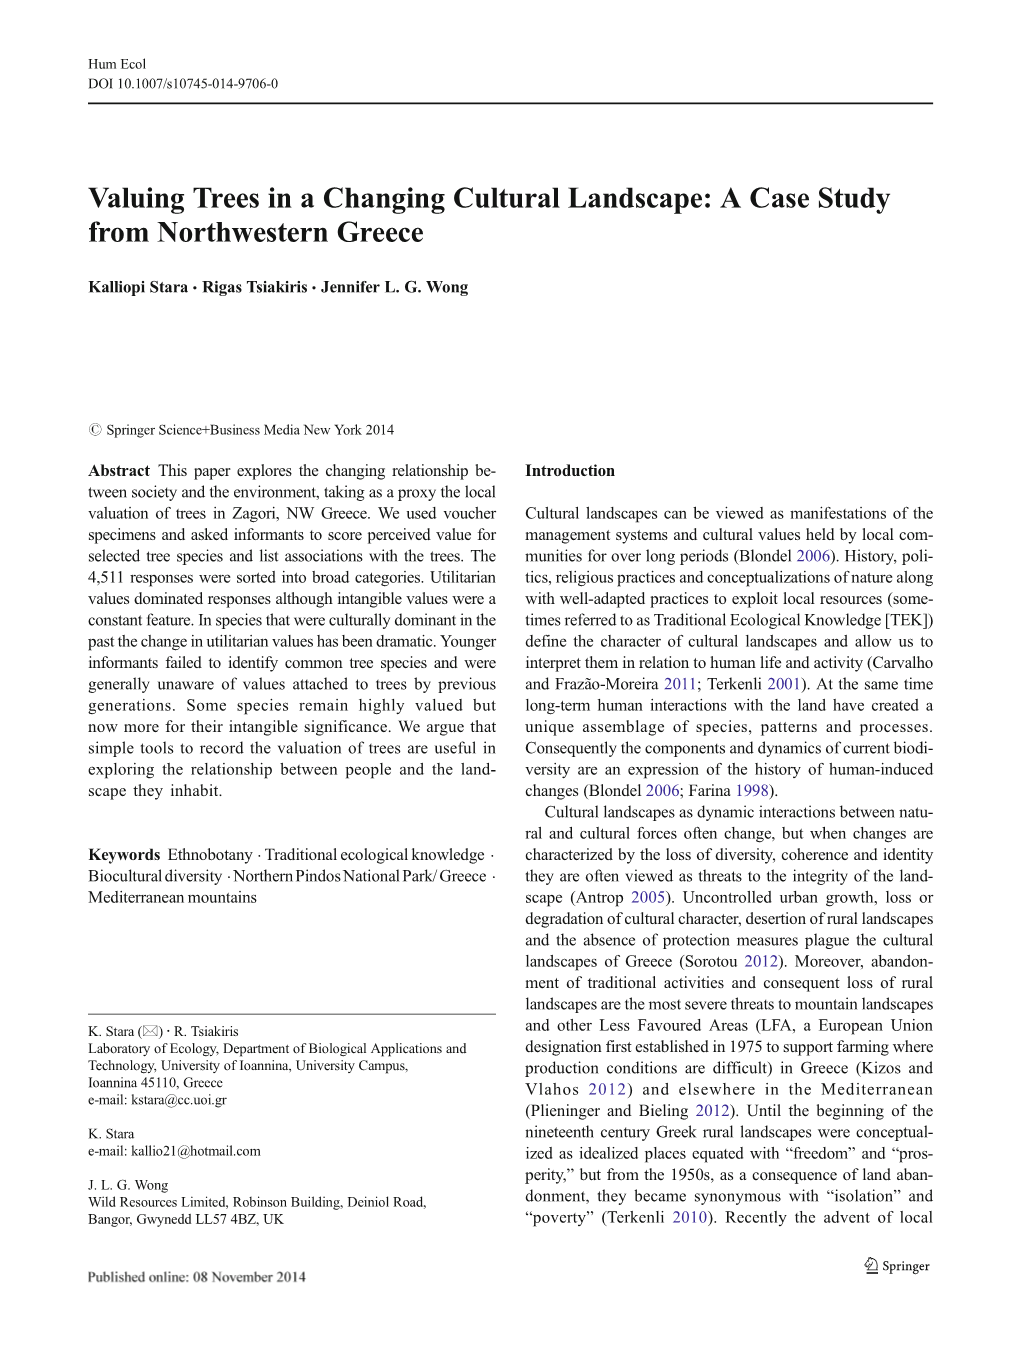 Valuing Trees in a Changing Cultural Landscape: a Case Study from Northwestern Greece